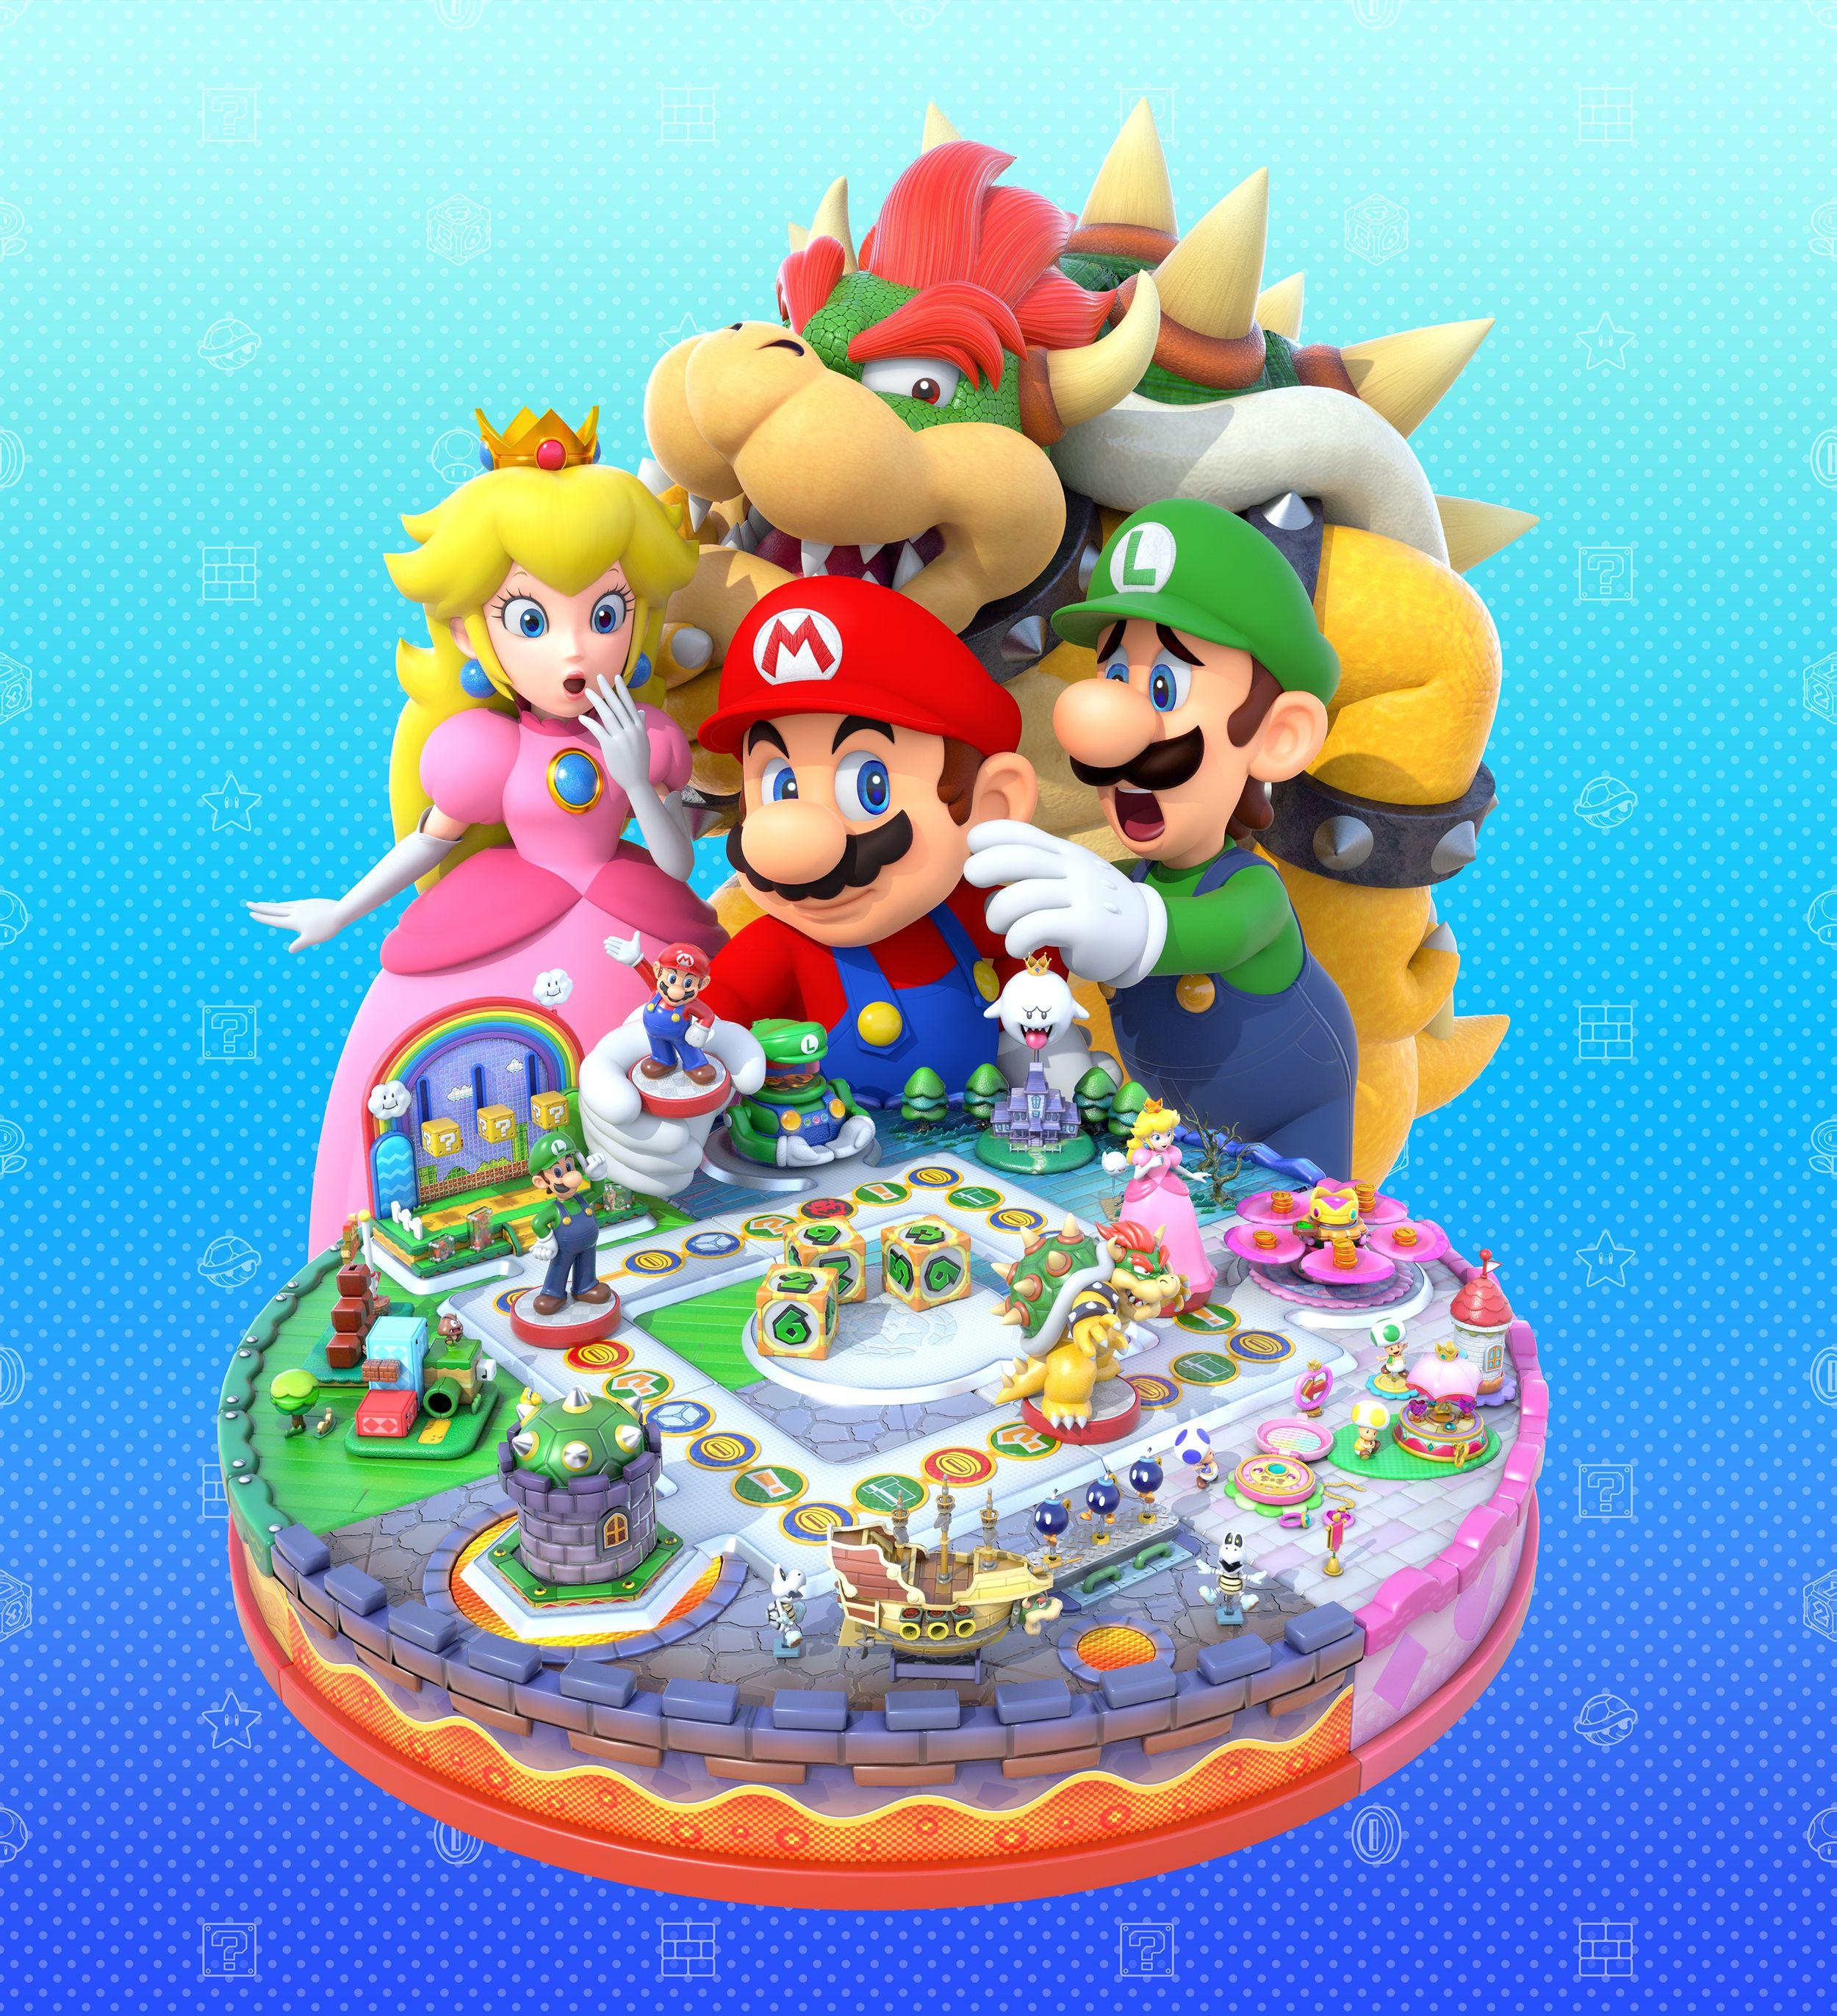 Mario Party 10 Archives